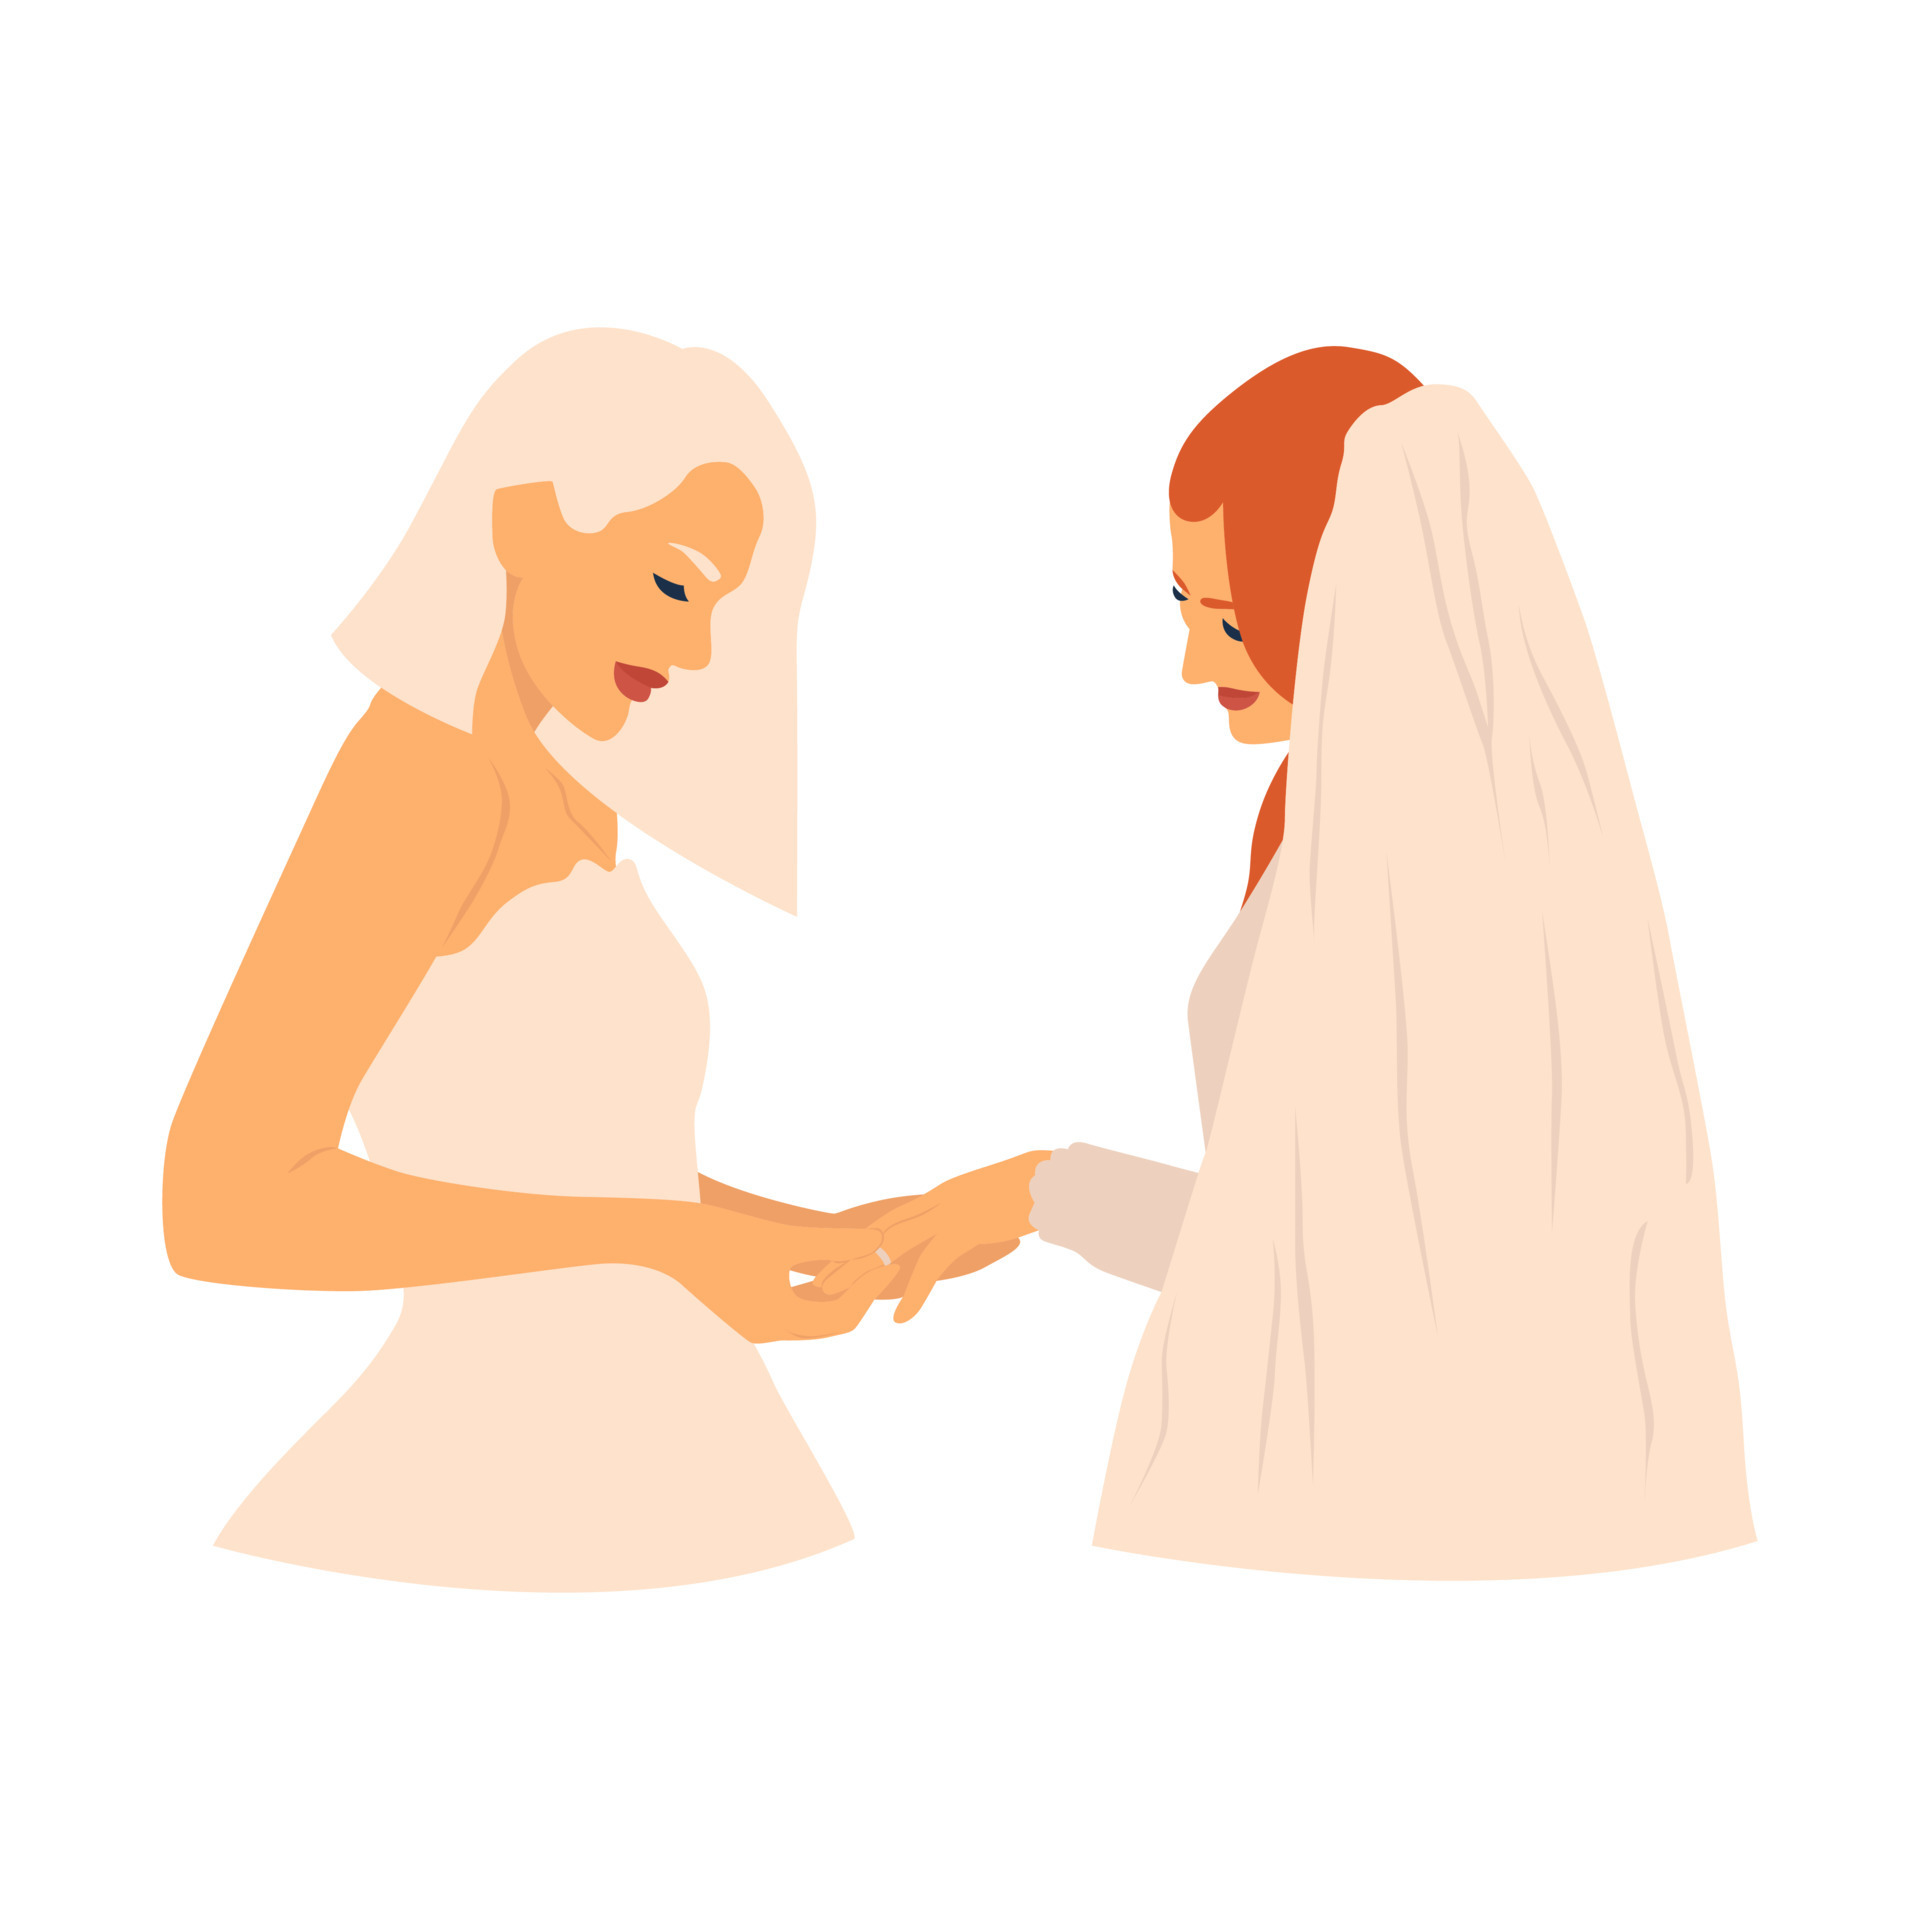 Silhouette of smiling lesbians couple wearing wedding rings on wedding day. Happy same sex spouses celebrating marriage. LGBT rights. Homosexual couples photo